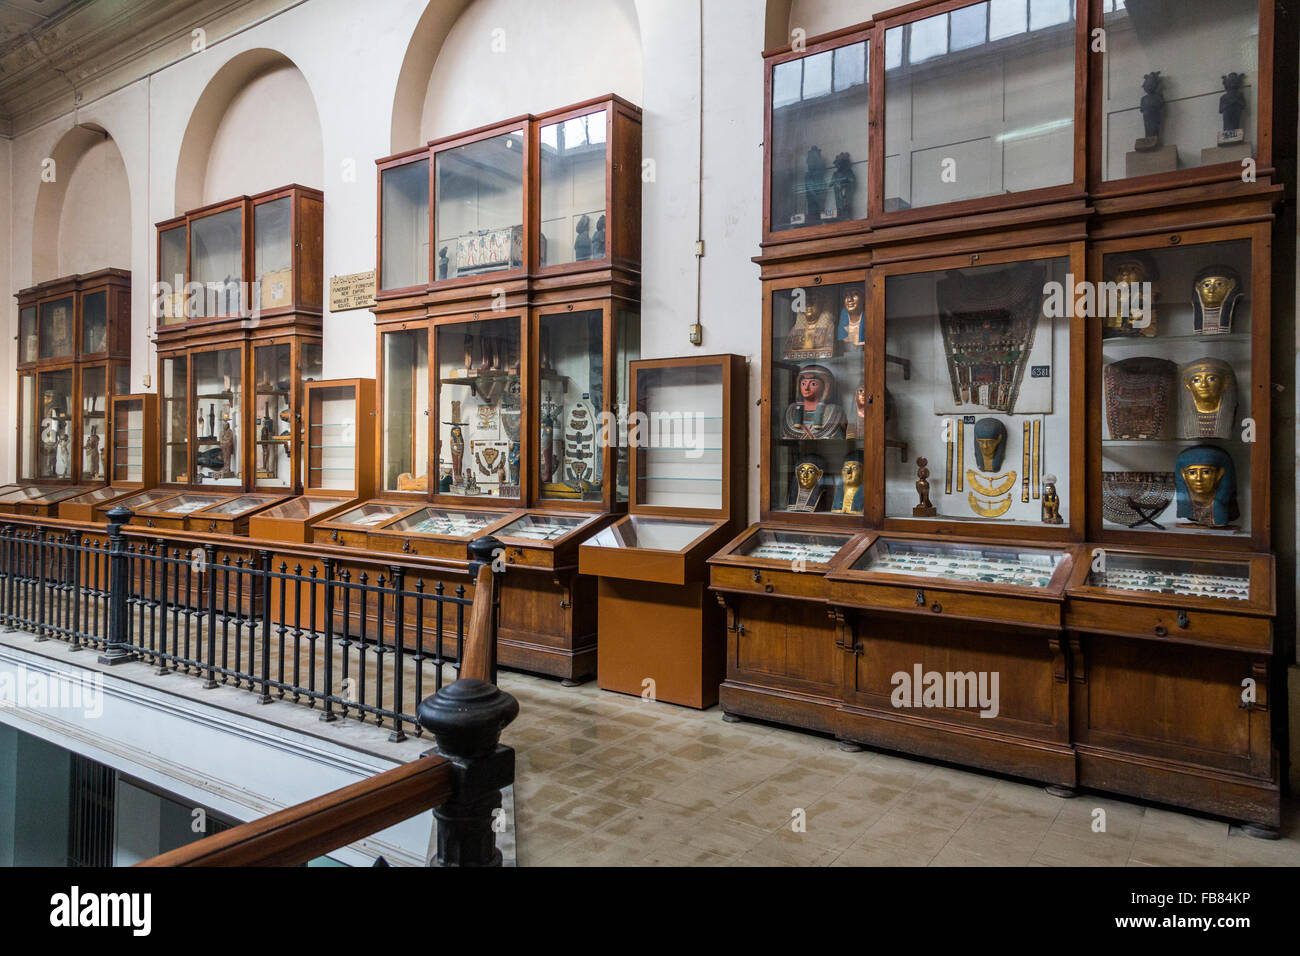 interior view of the Egyptian Museum, Cairo, Egypt Stock Photo